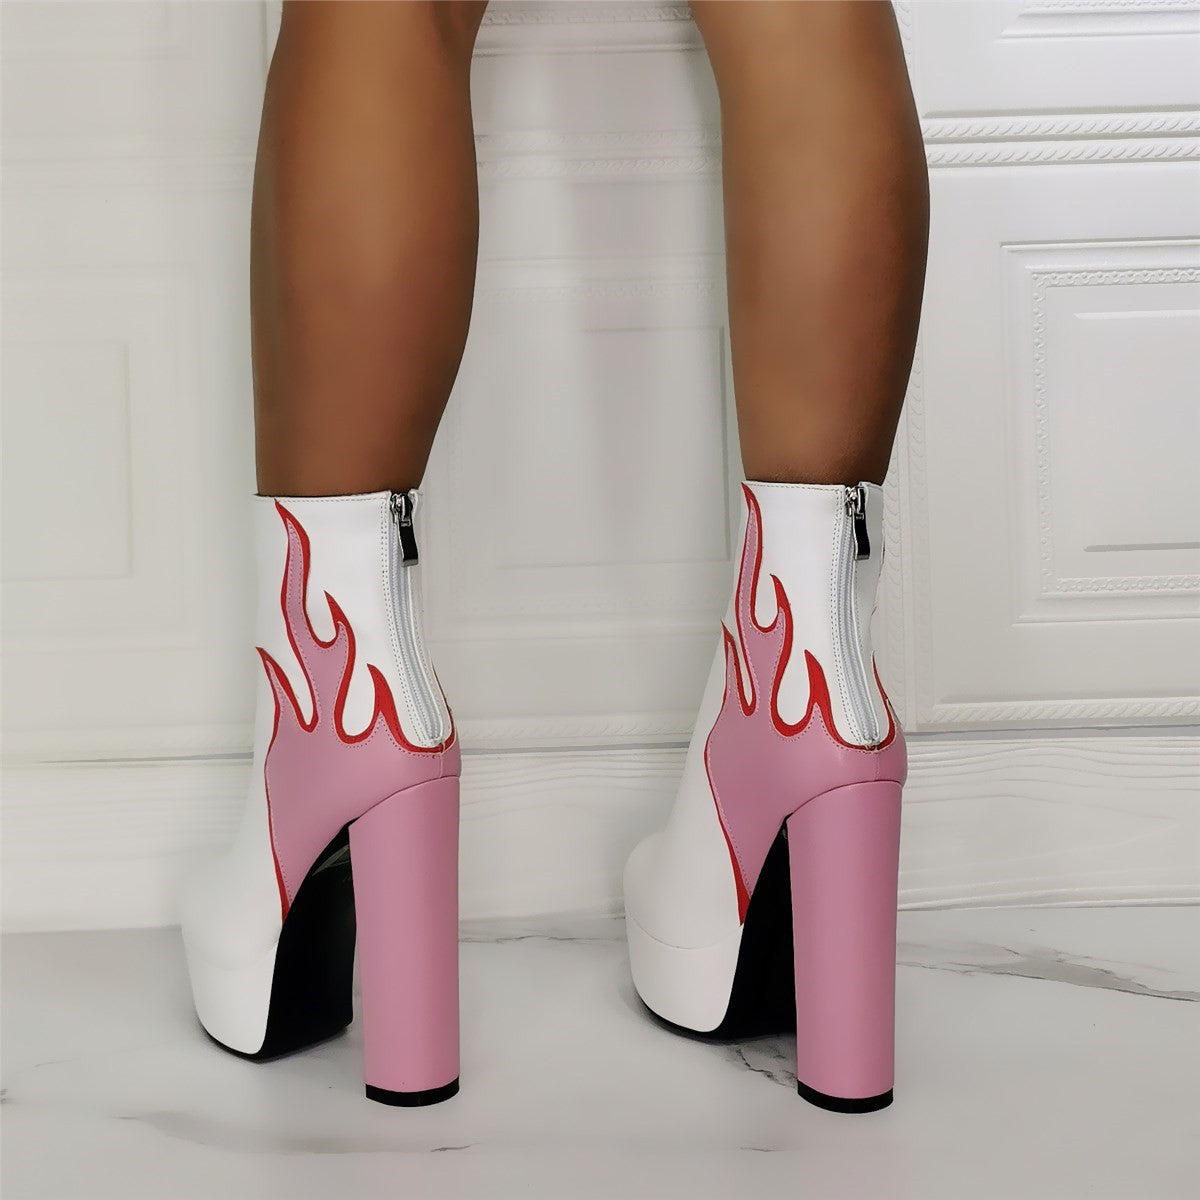 Pink Flame Thick Platform High Heel Shoes Sexy Boots